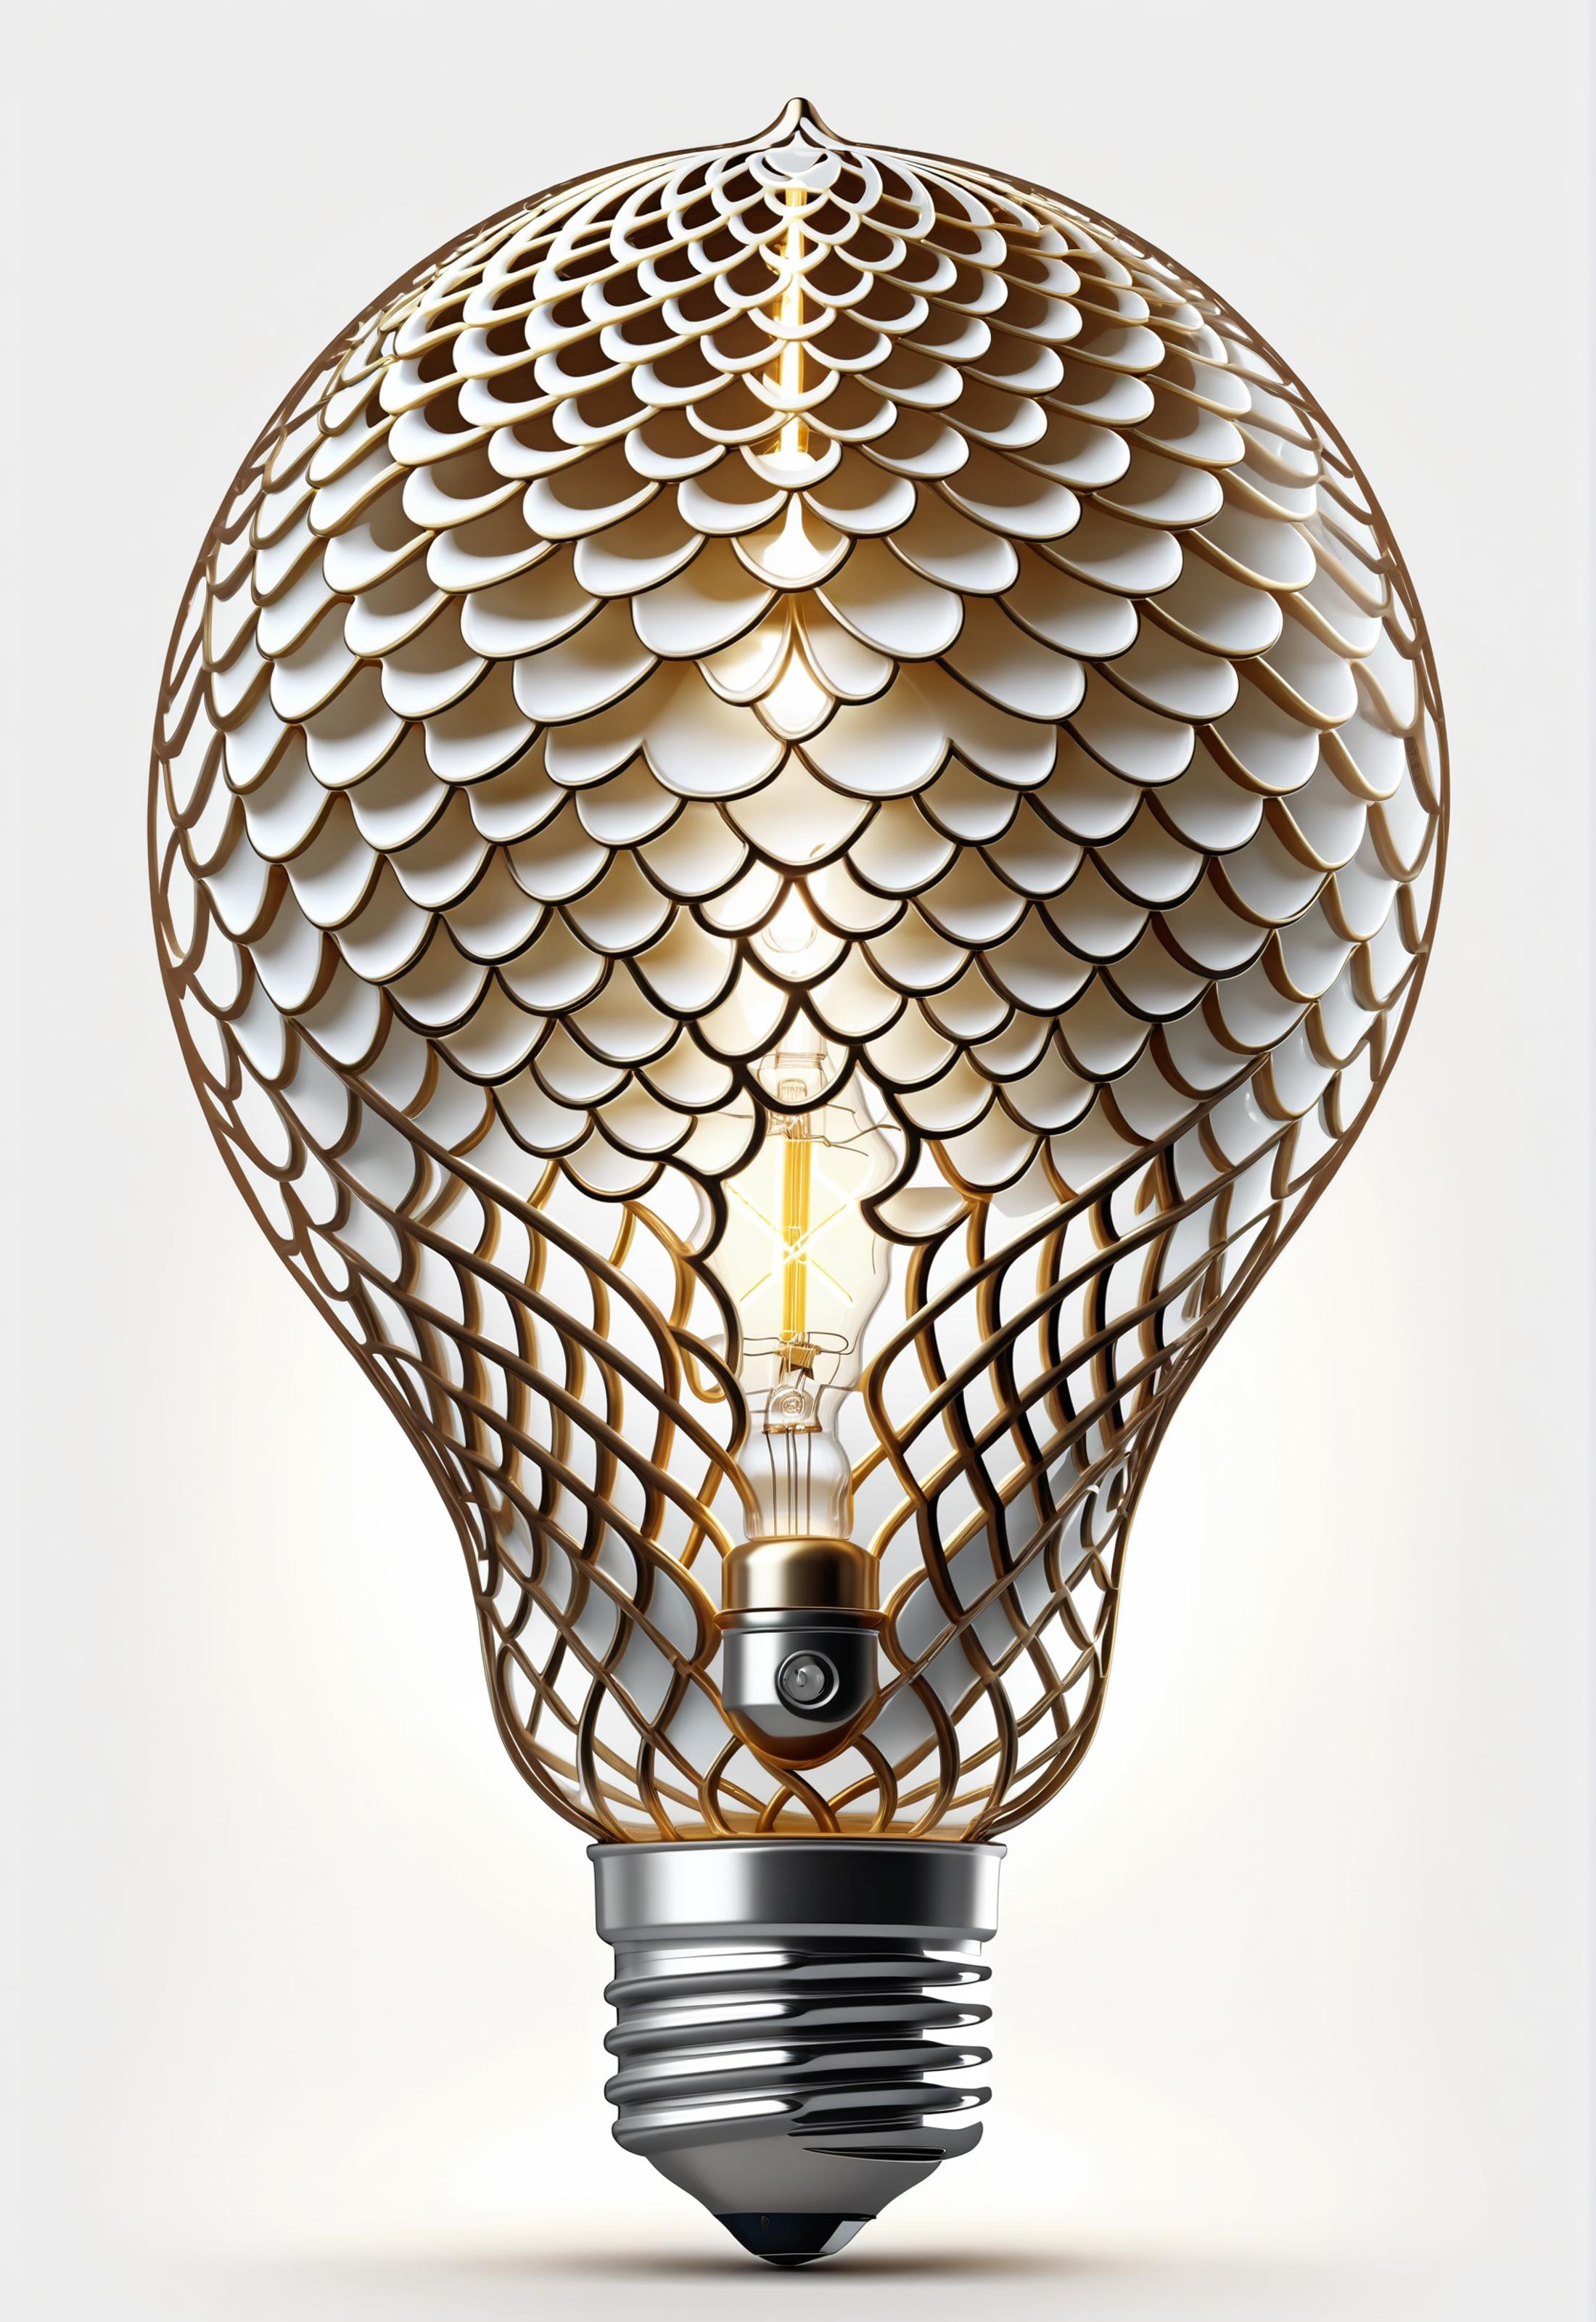 A Gold Lamp Shade with a Light Bulb Inside